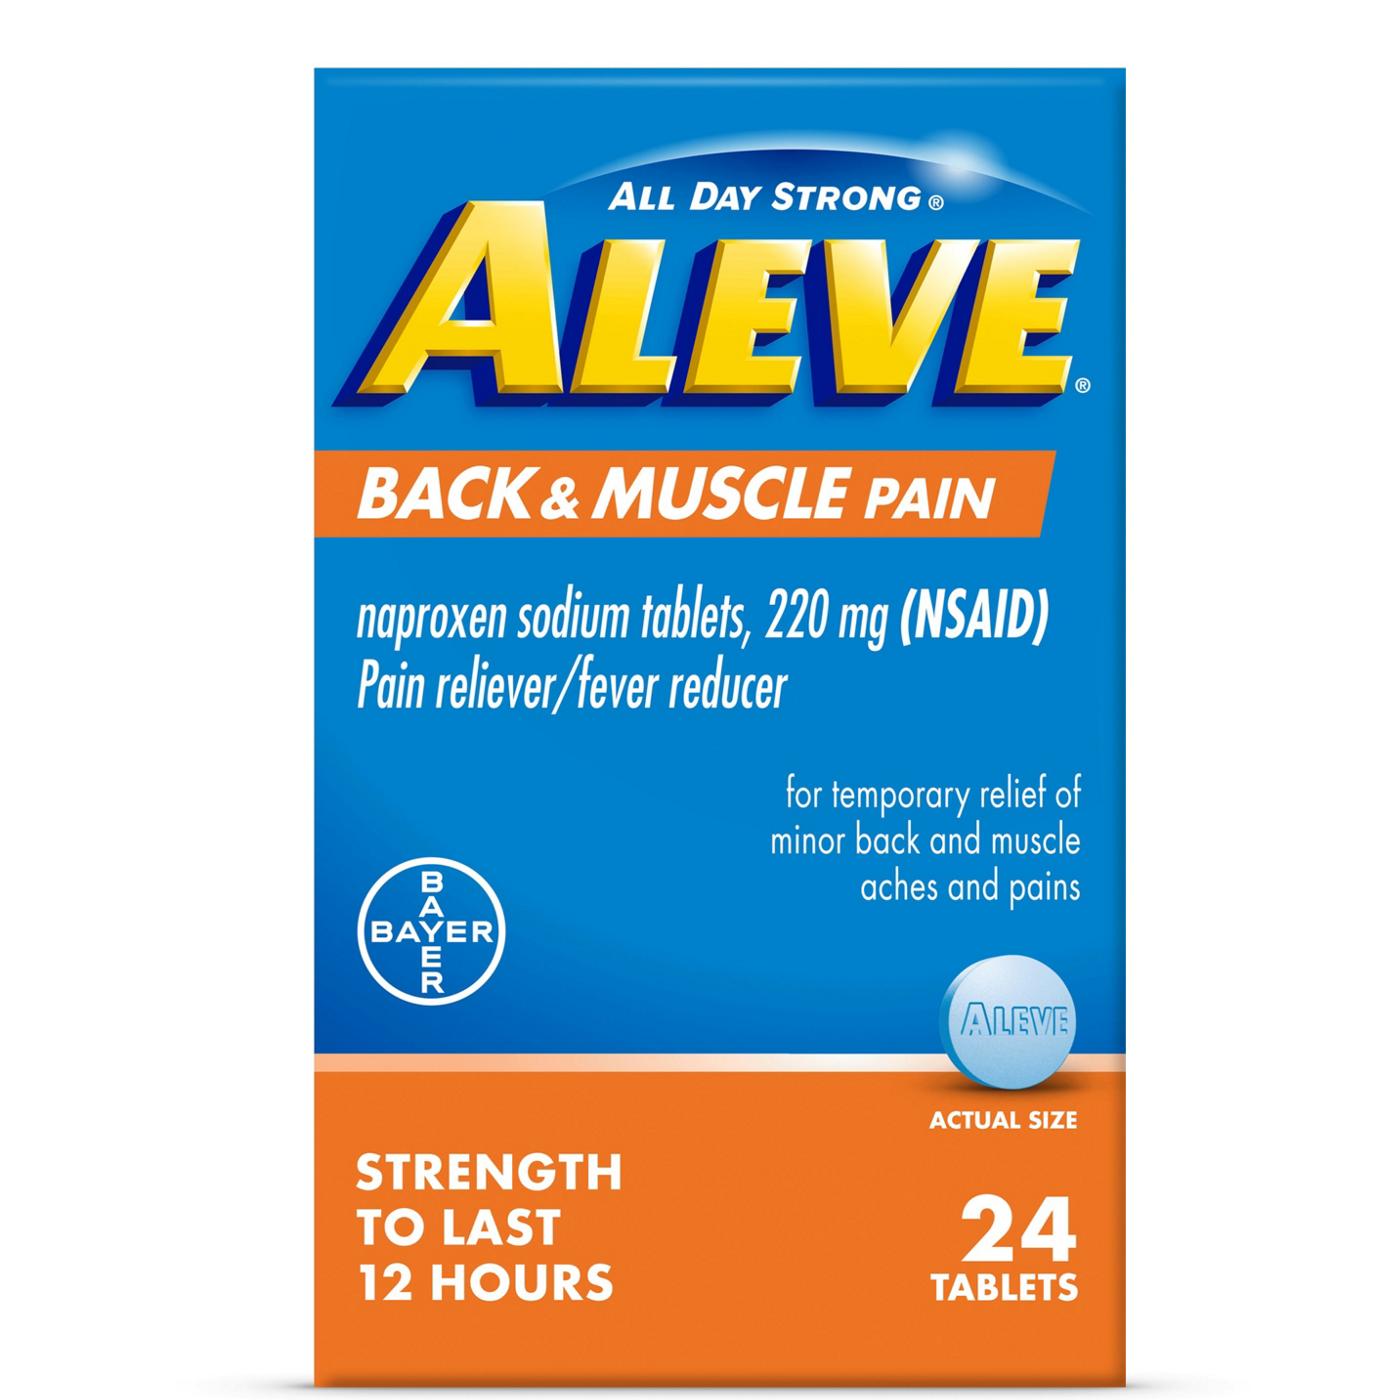 Aleve Back & Muscle Pain Naproxen 220mg Tablets; image 1 of 6